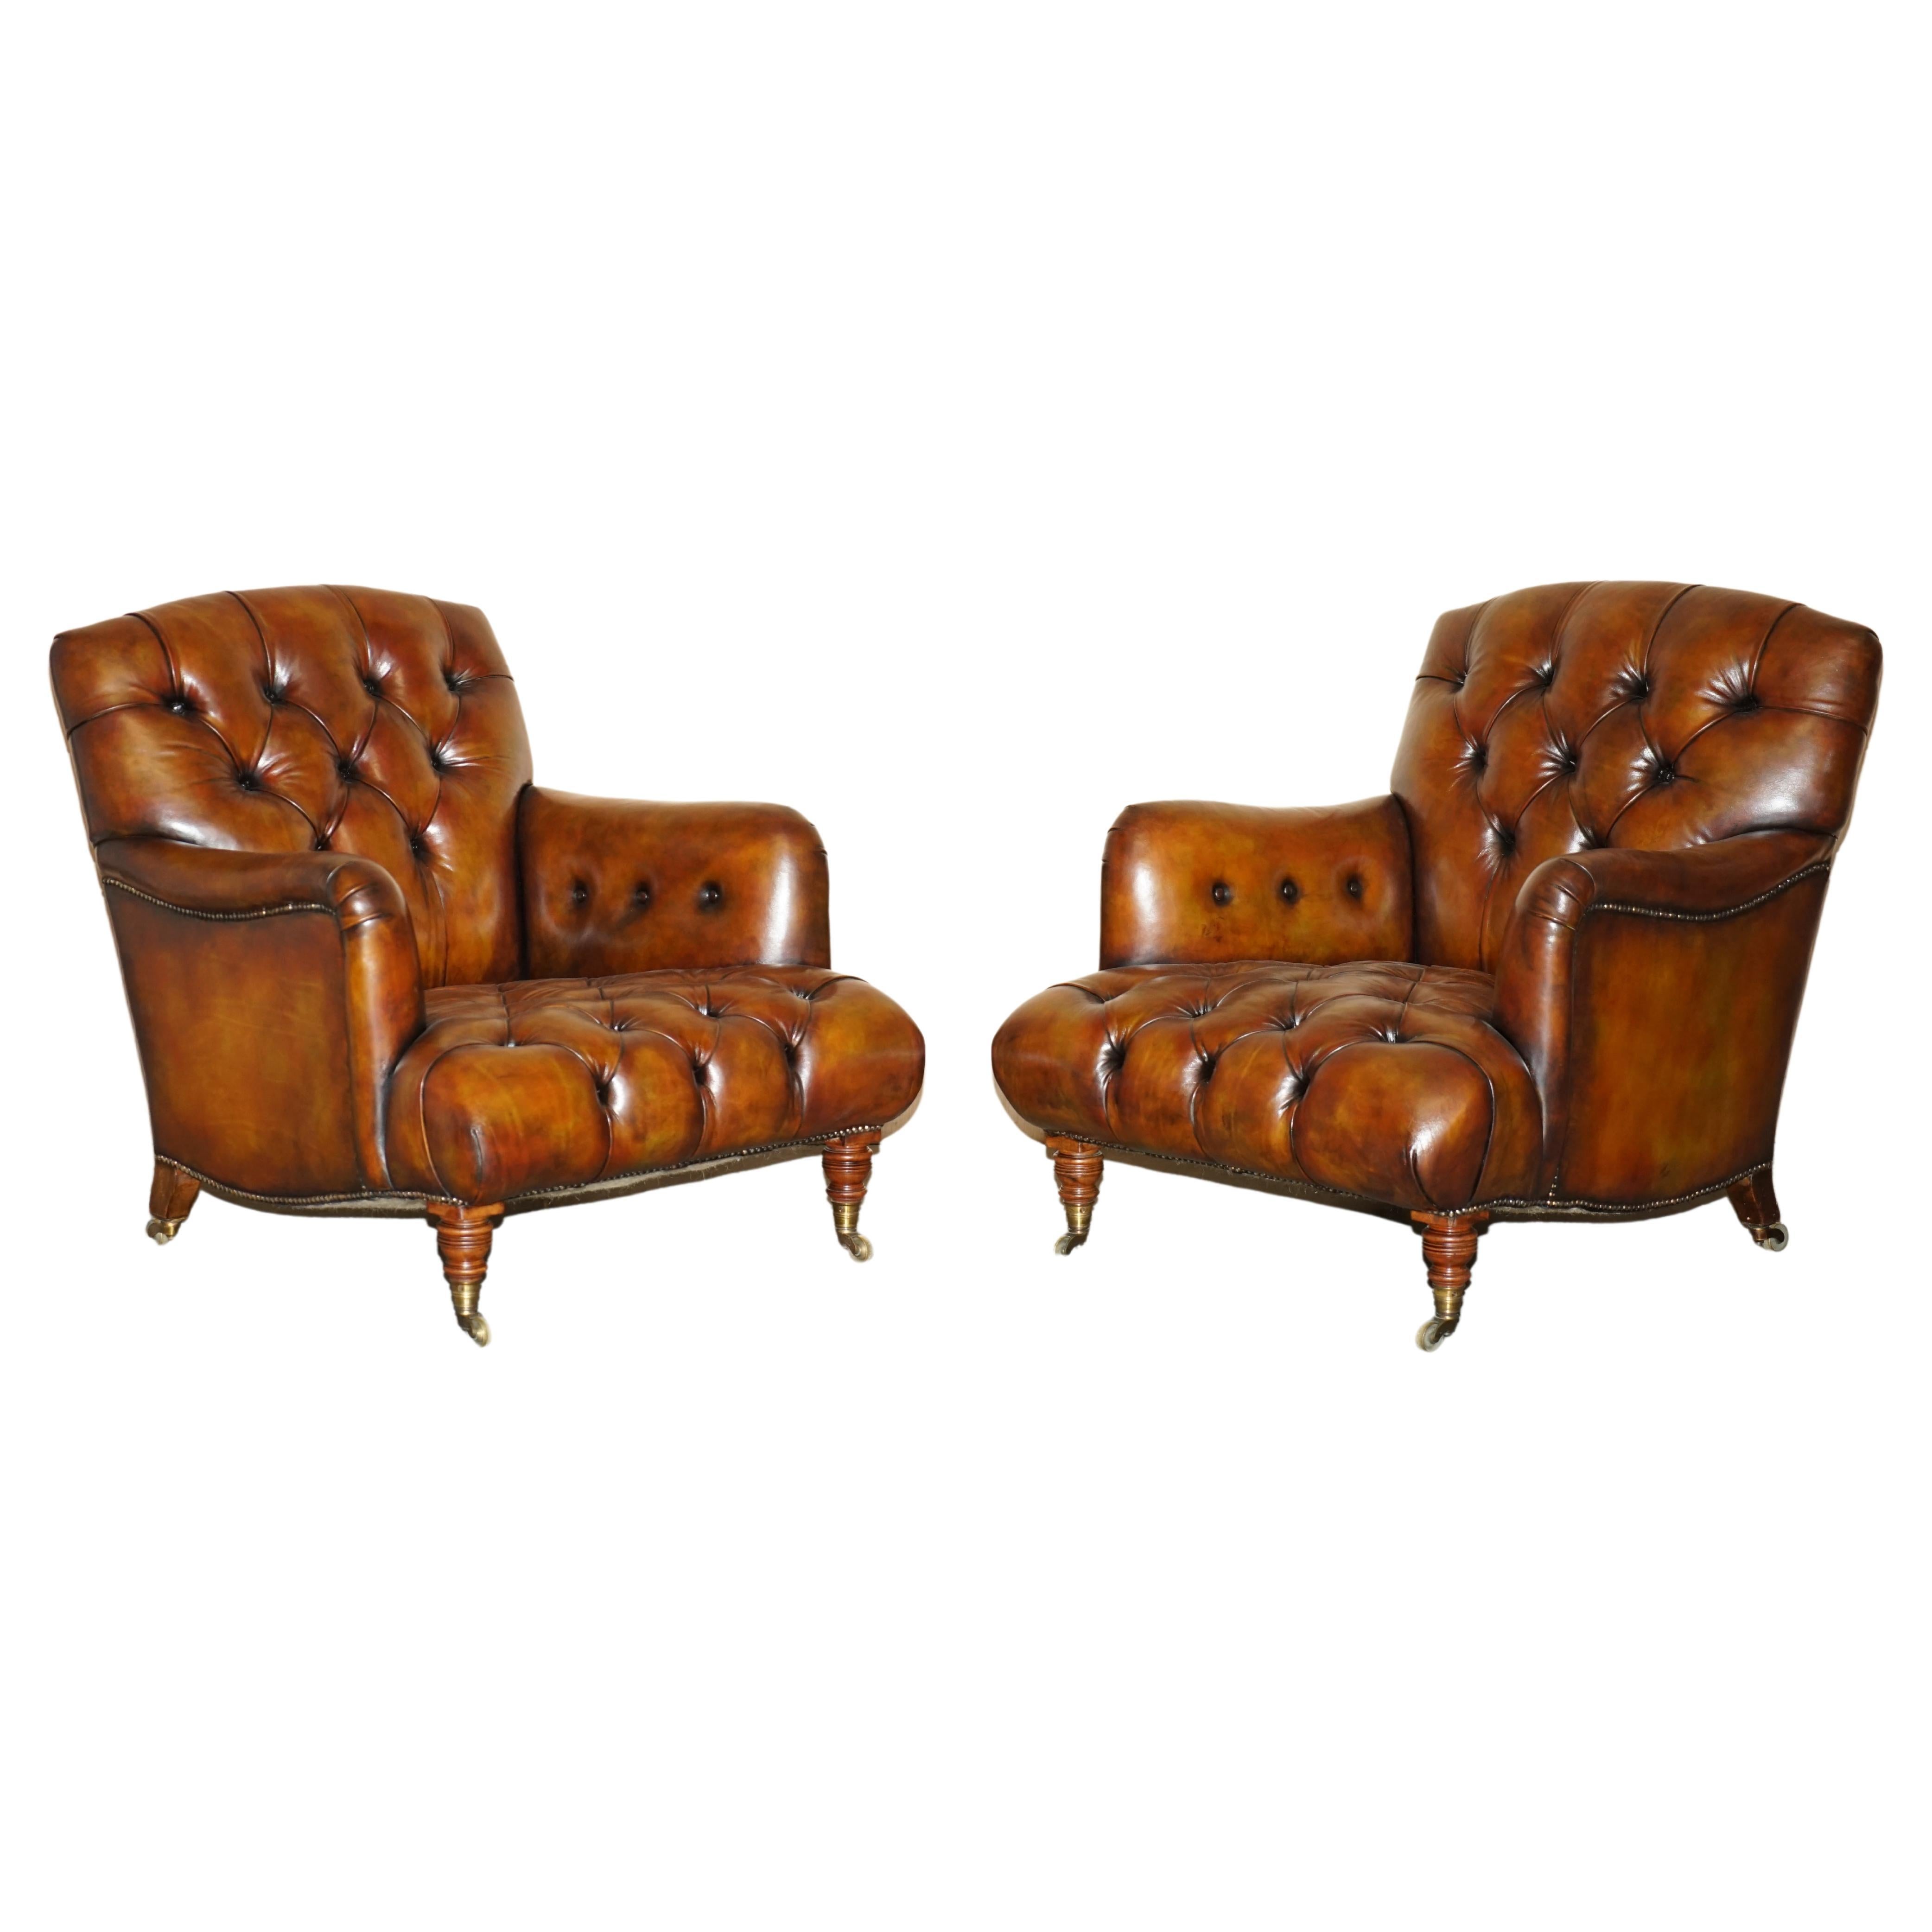 Pair of Antique Howard & Son's Bridgewater Brown Leather Chesterfield Armchairs